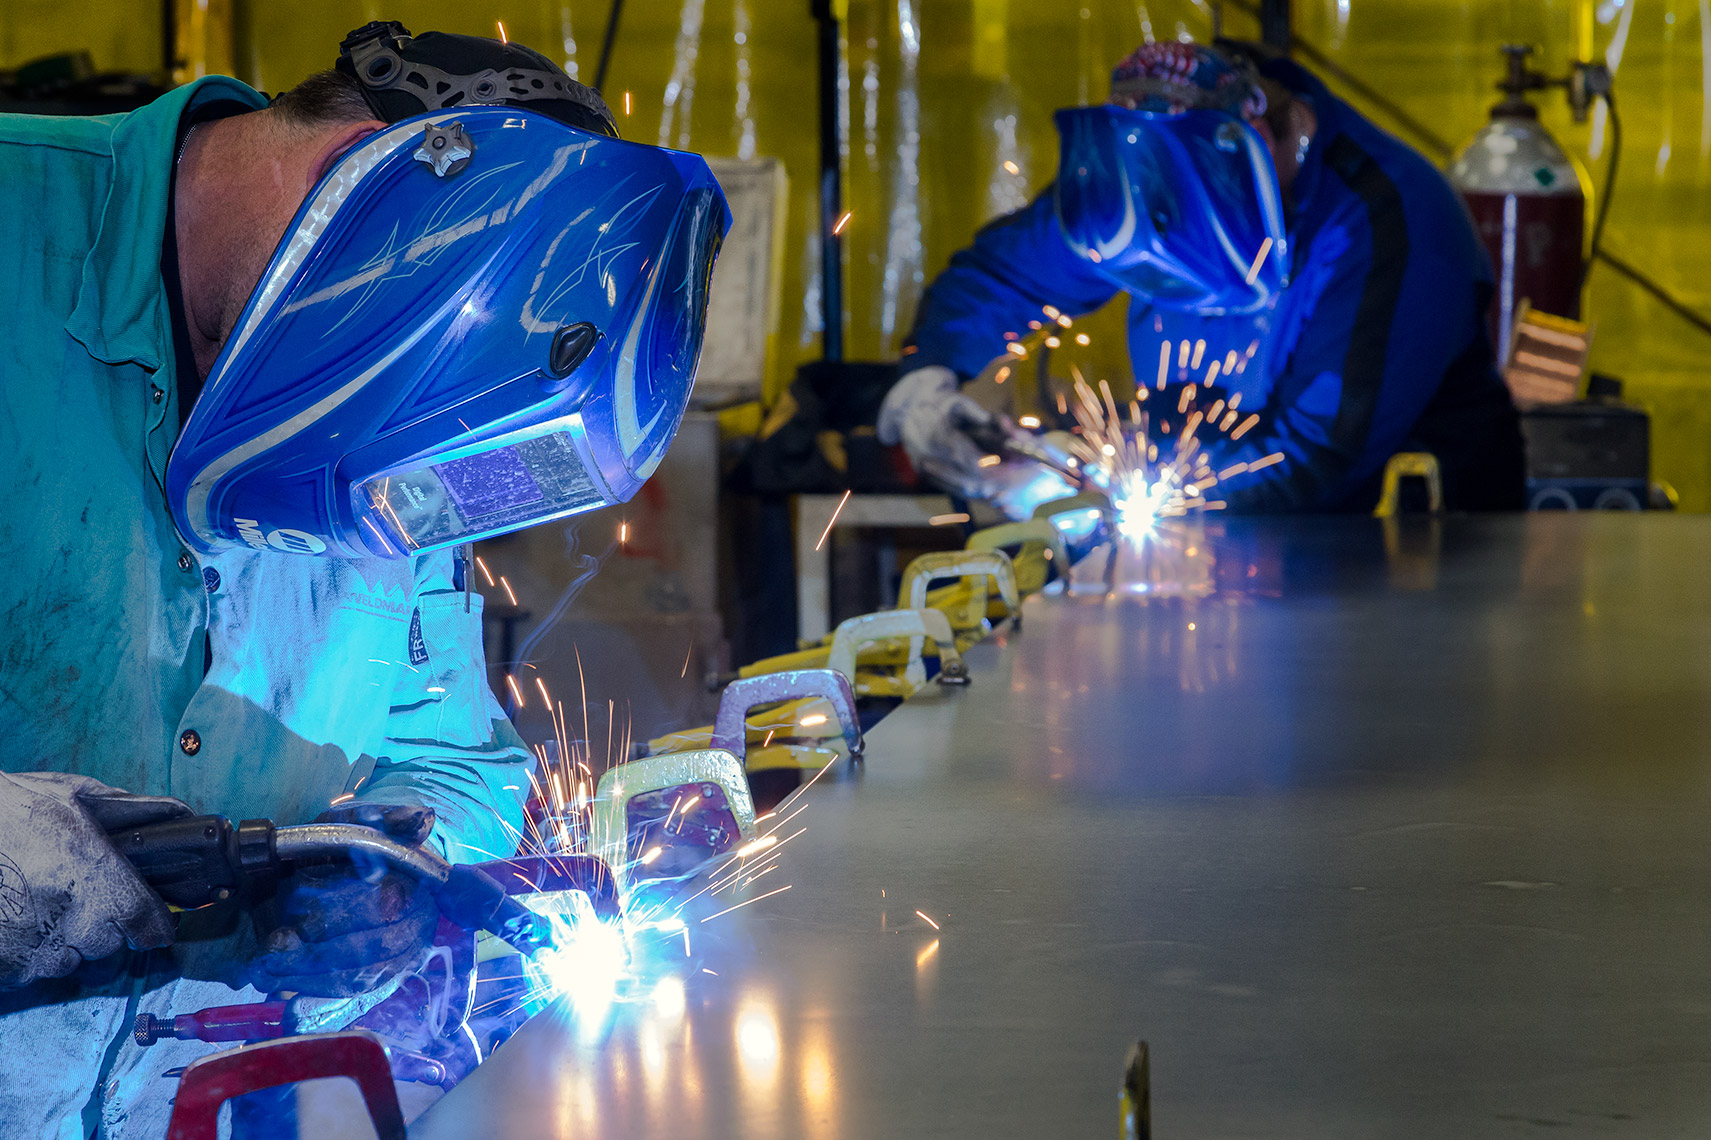 alternate view of welders at a robotics fabrication facility